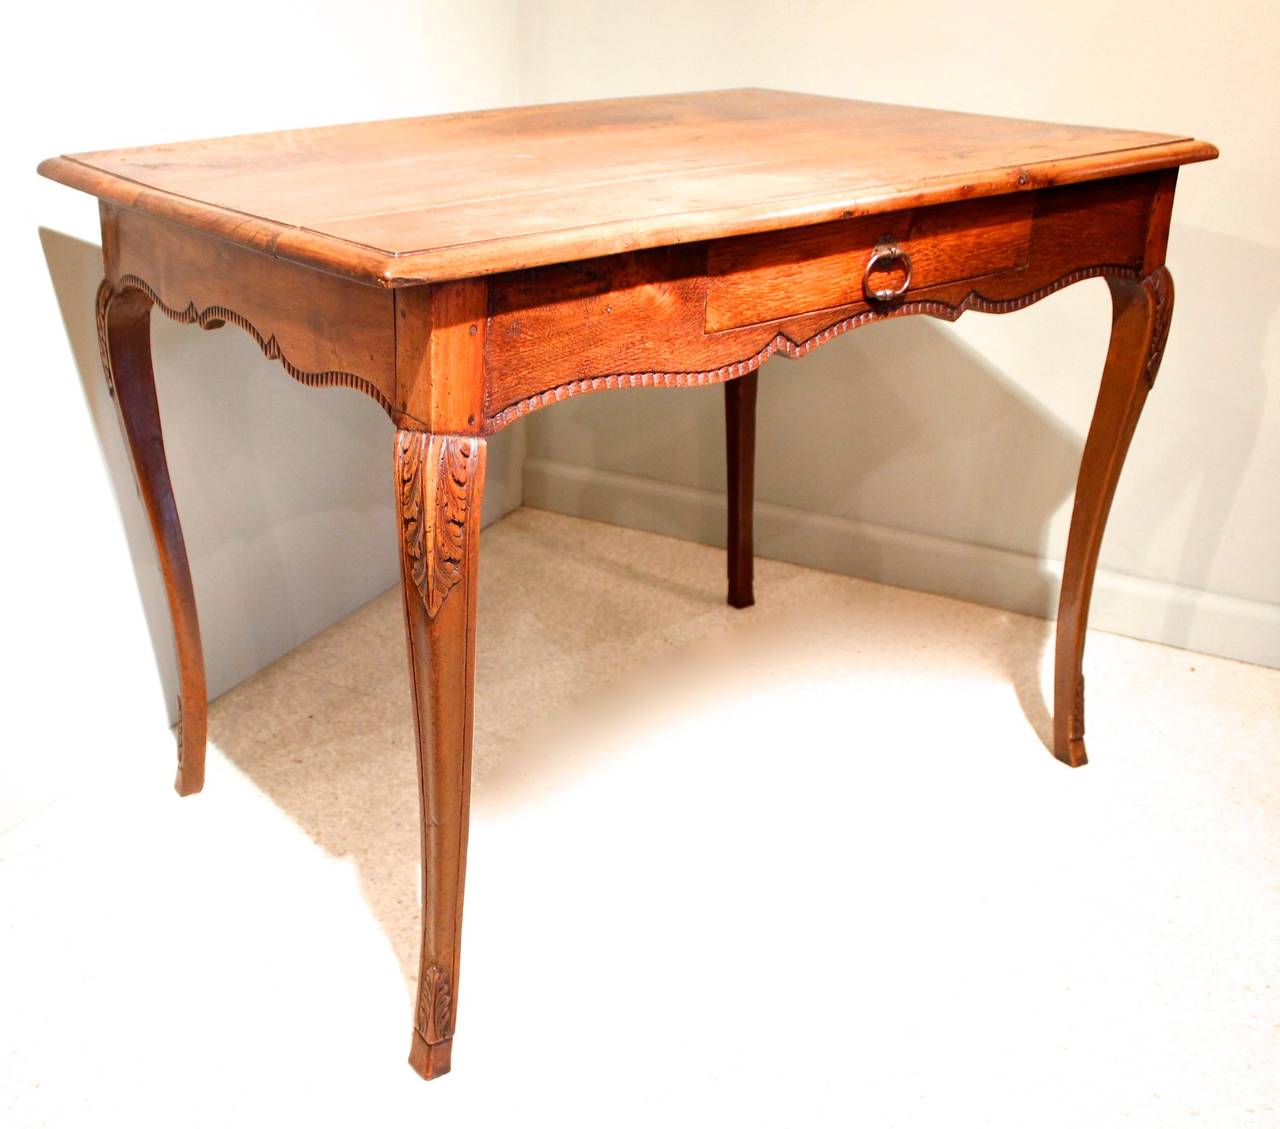 A versatile table of mixed woods: walnut and oak, finished with a carved serpentine skirt on all four sides. Cabriole legs are attractively carved with acanthus at the knee and just above the hoof. Second half of the 19th century. Well executed